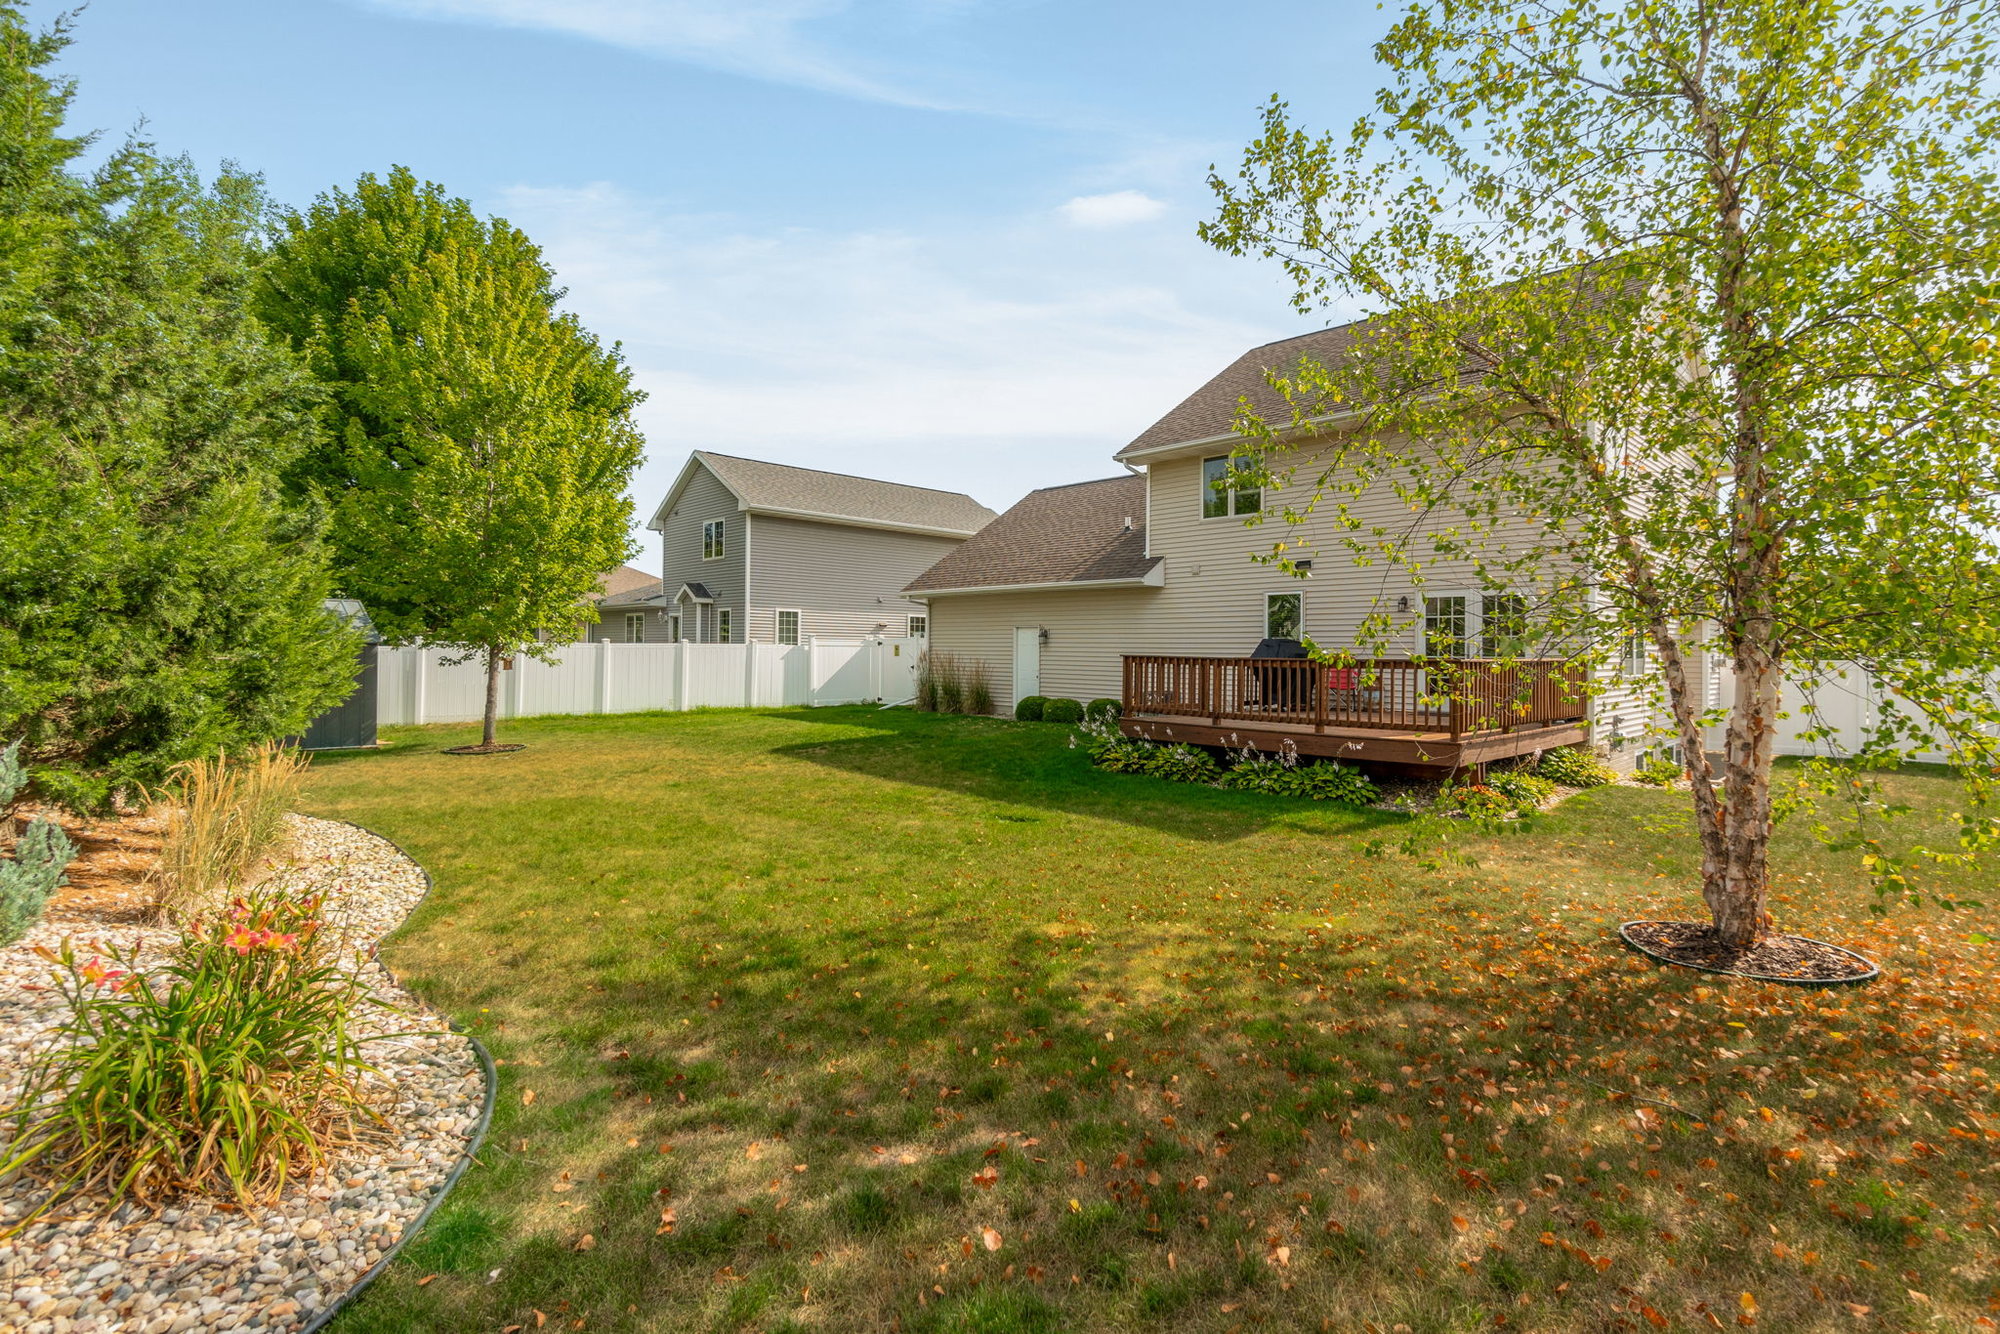 Perfectly Situated & Maintained. You Will Fall in Love with this 2-Story Home in Cedar Falls Iowa